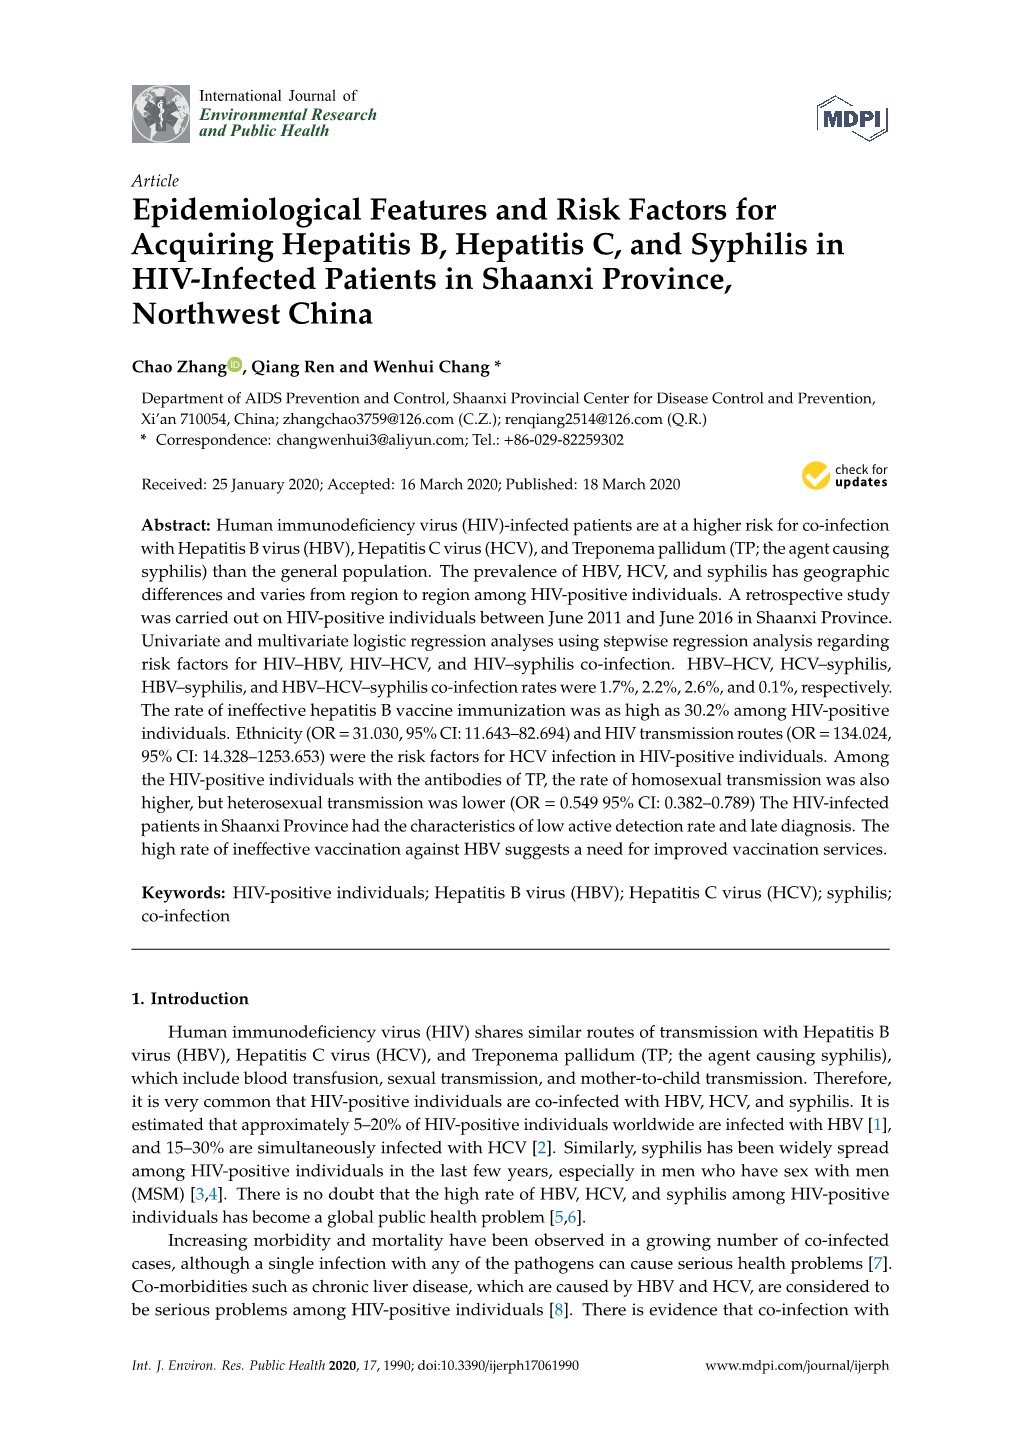 Epidemiological Features and Risk Factors for Acquiring Hepatitis B, Hepatitis C, and Syphilis in HIV-Infected Patients in Shaanxi Province, Northwest China